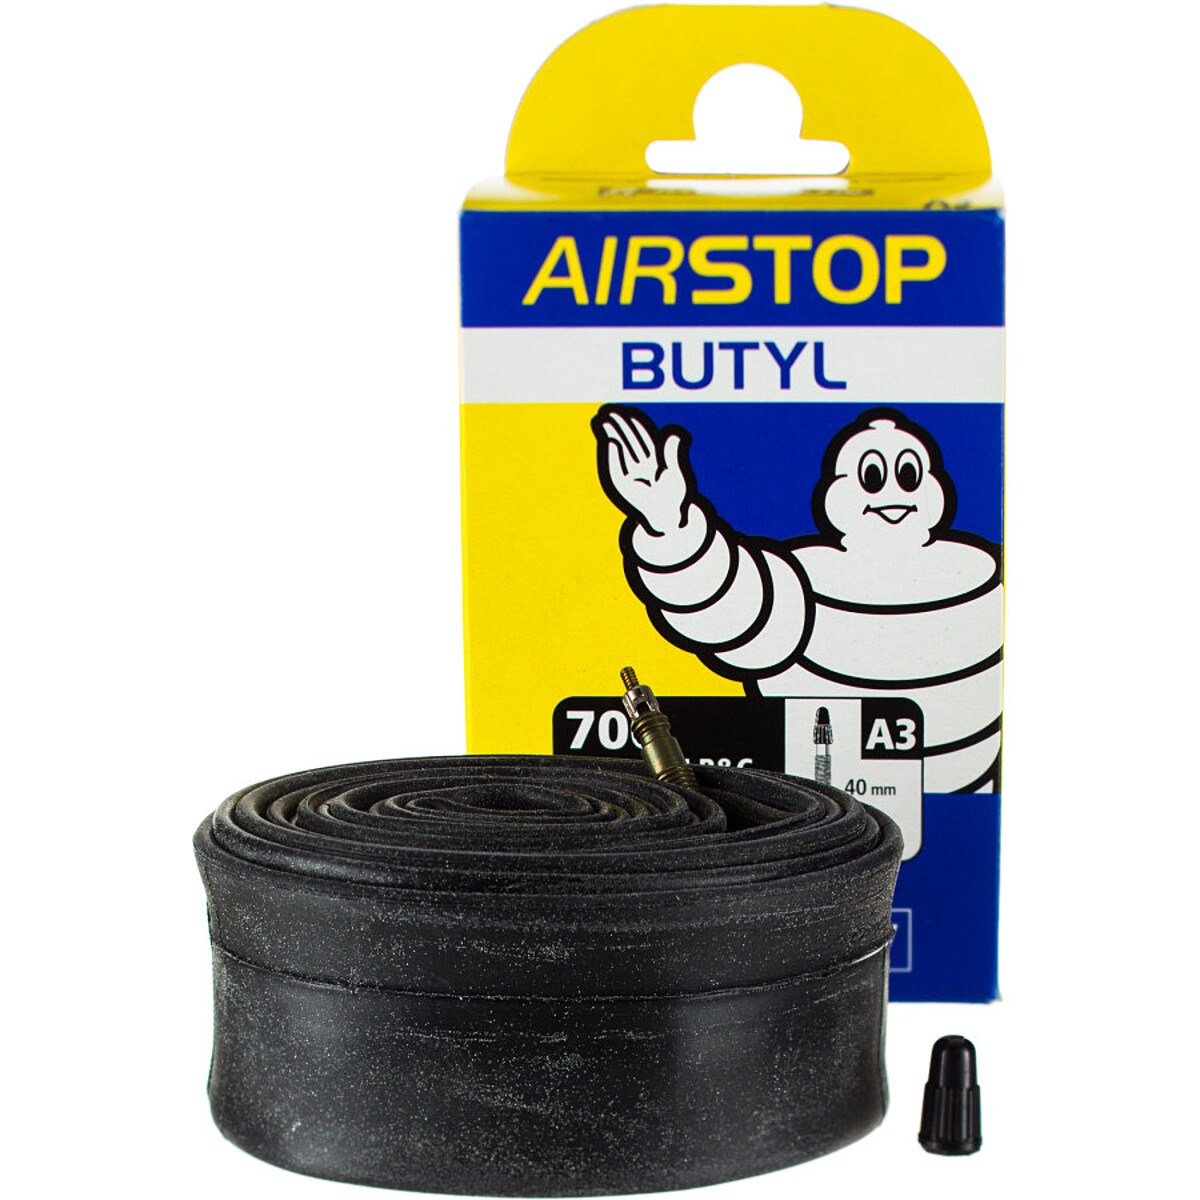 Michelin Airstop Butyl Road Tube